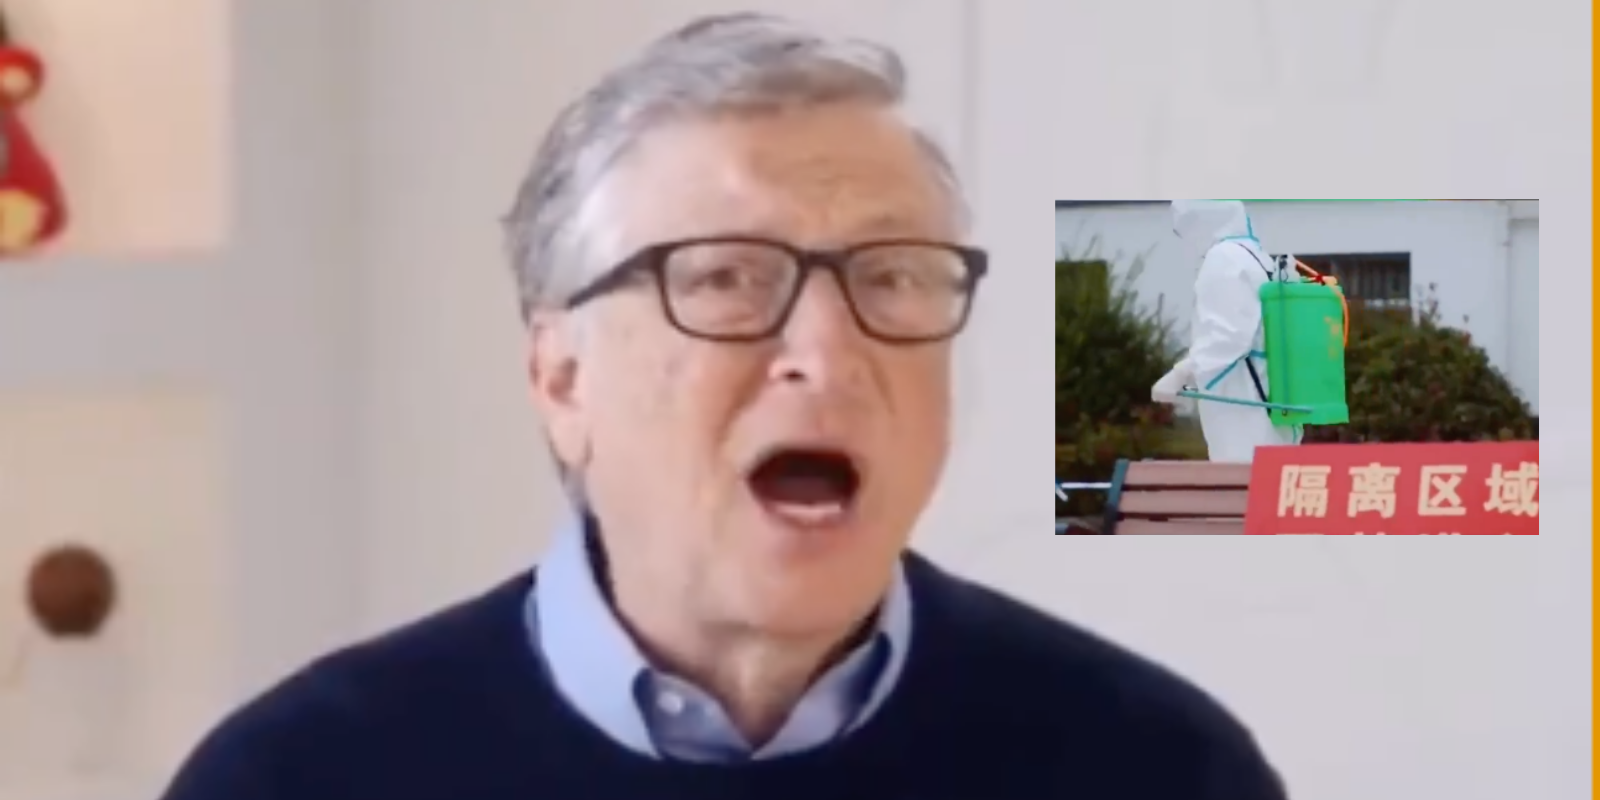 WATCH: Bill Gates praises China for their great work on Covid-19 in new video message